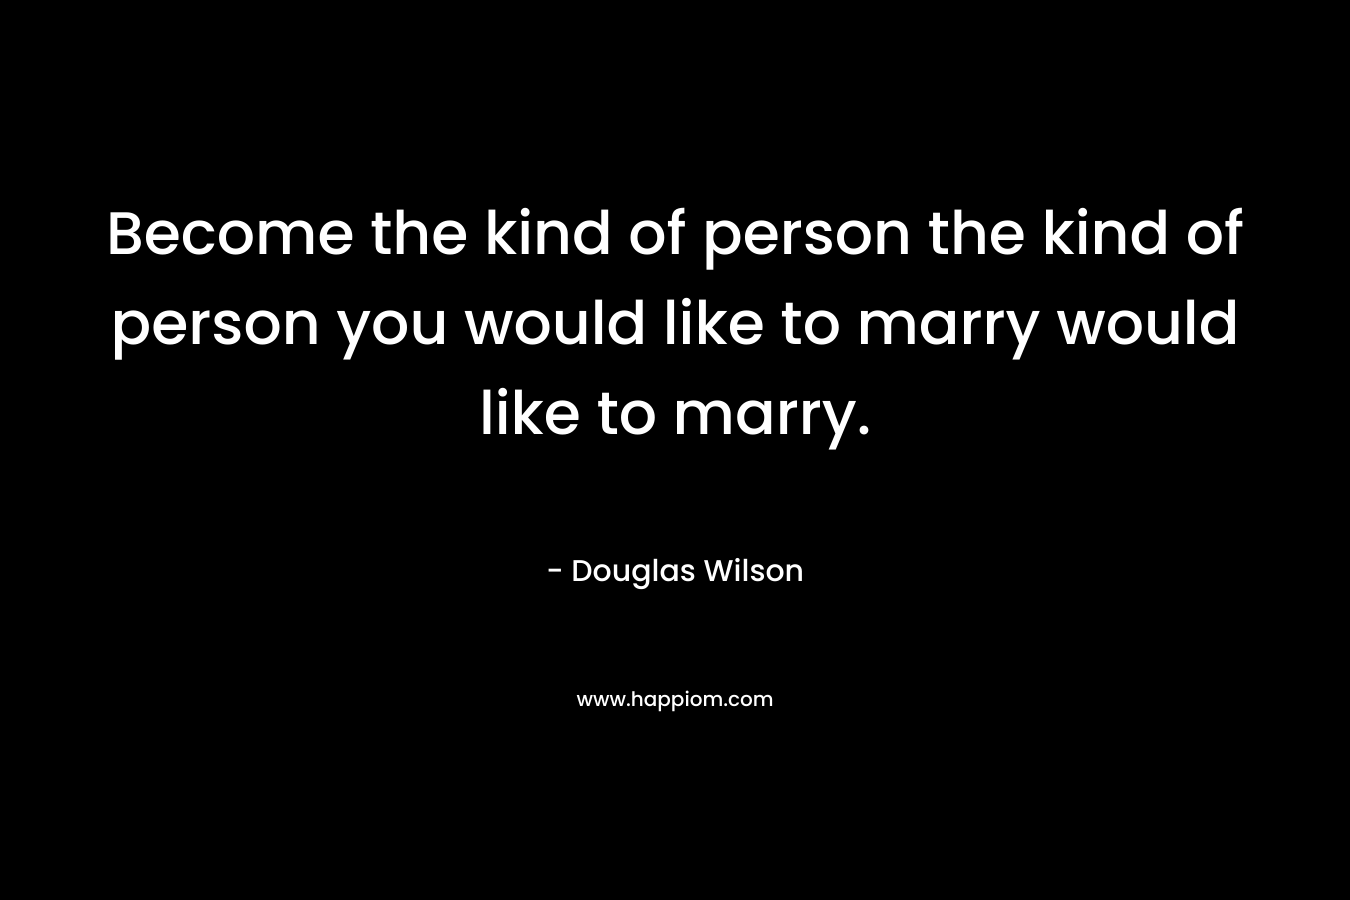 Become the kind of person the kind of person you would like to marry would like to marry.